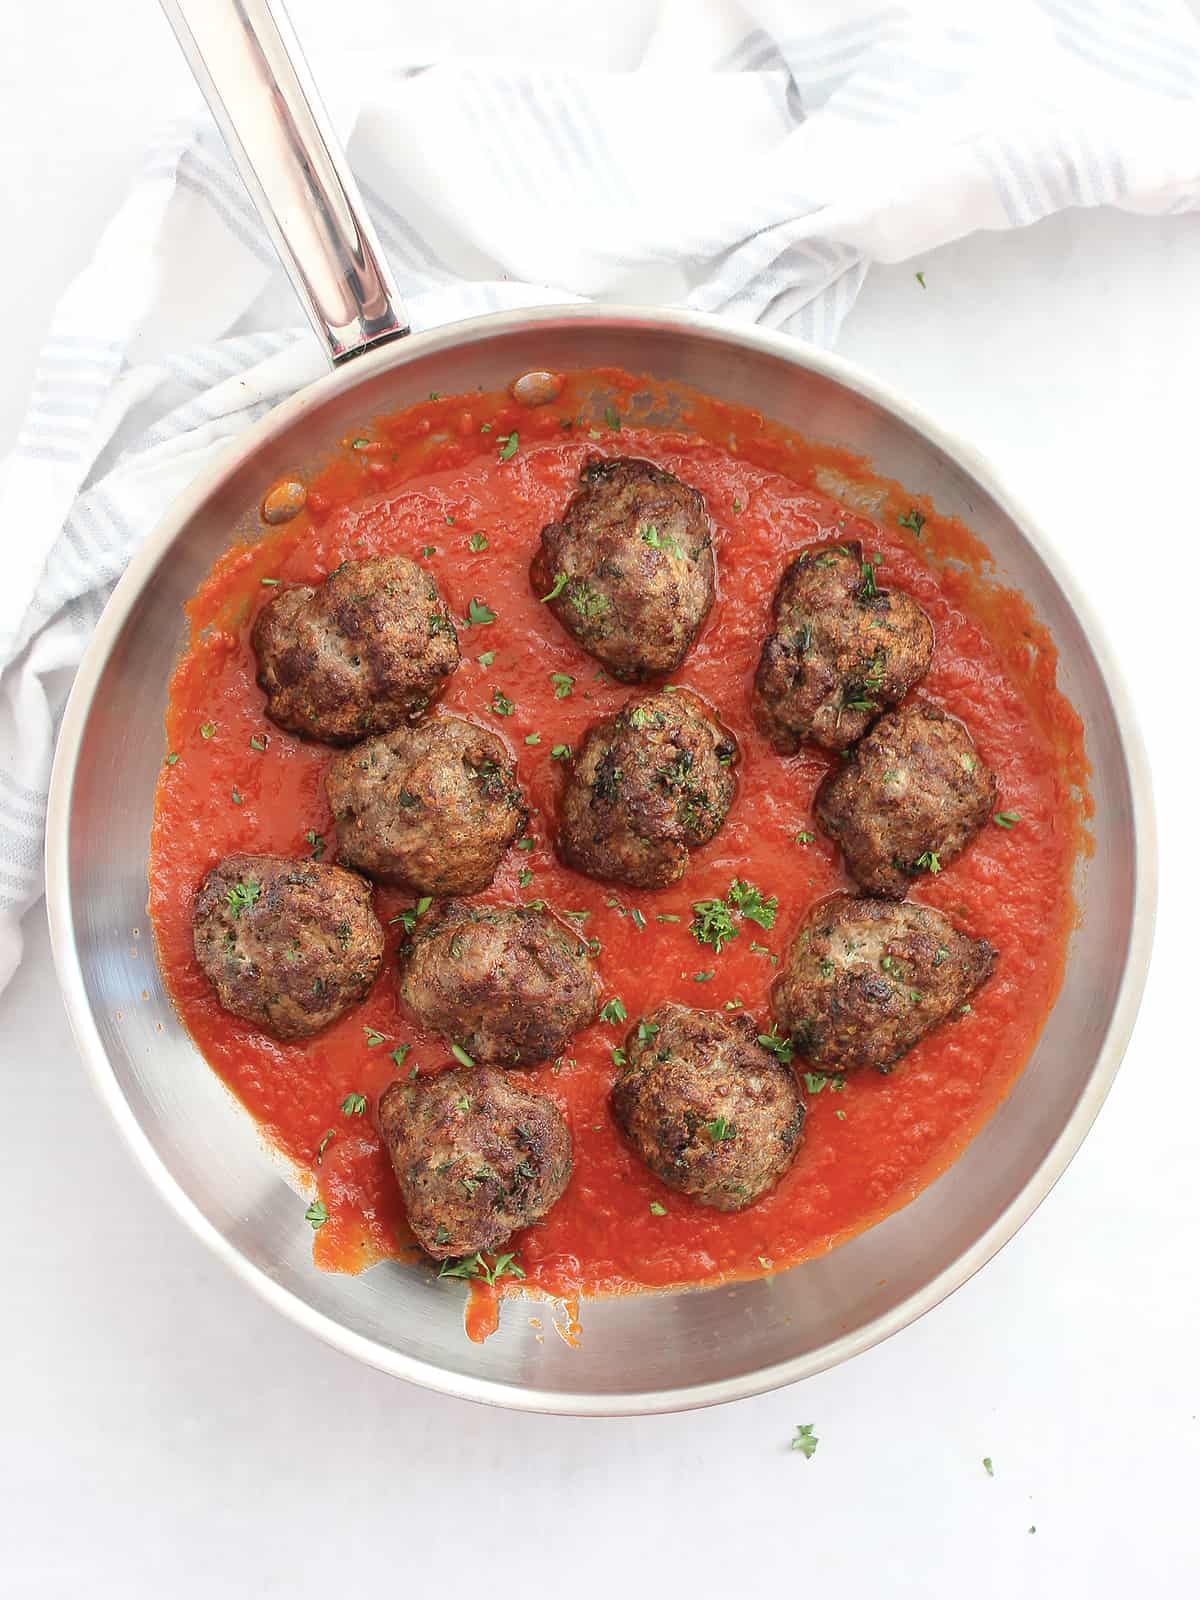 Lamb meatballs in a skillet with tomato sauce.